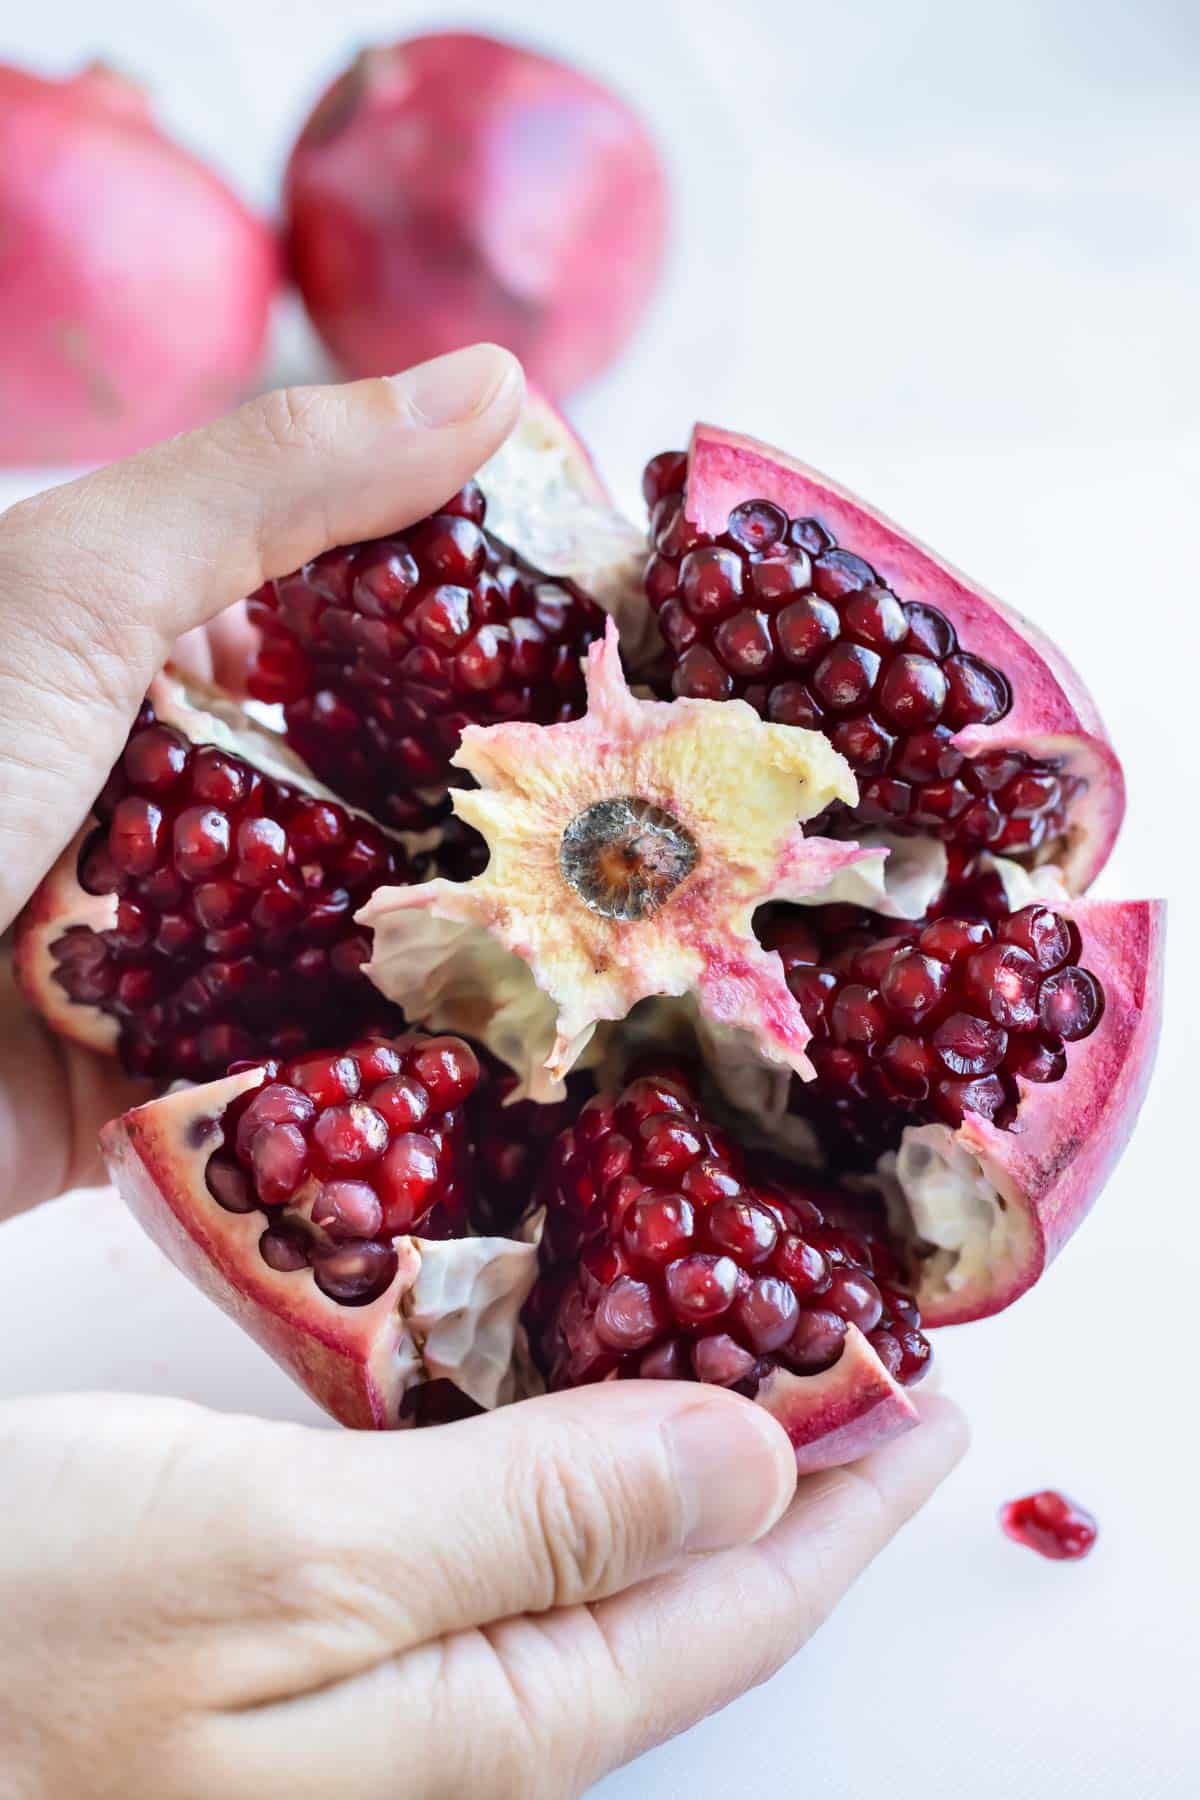 2 Easy Ways to Open and Seed a Pomegranate